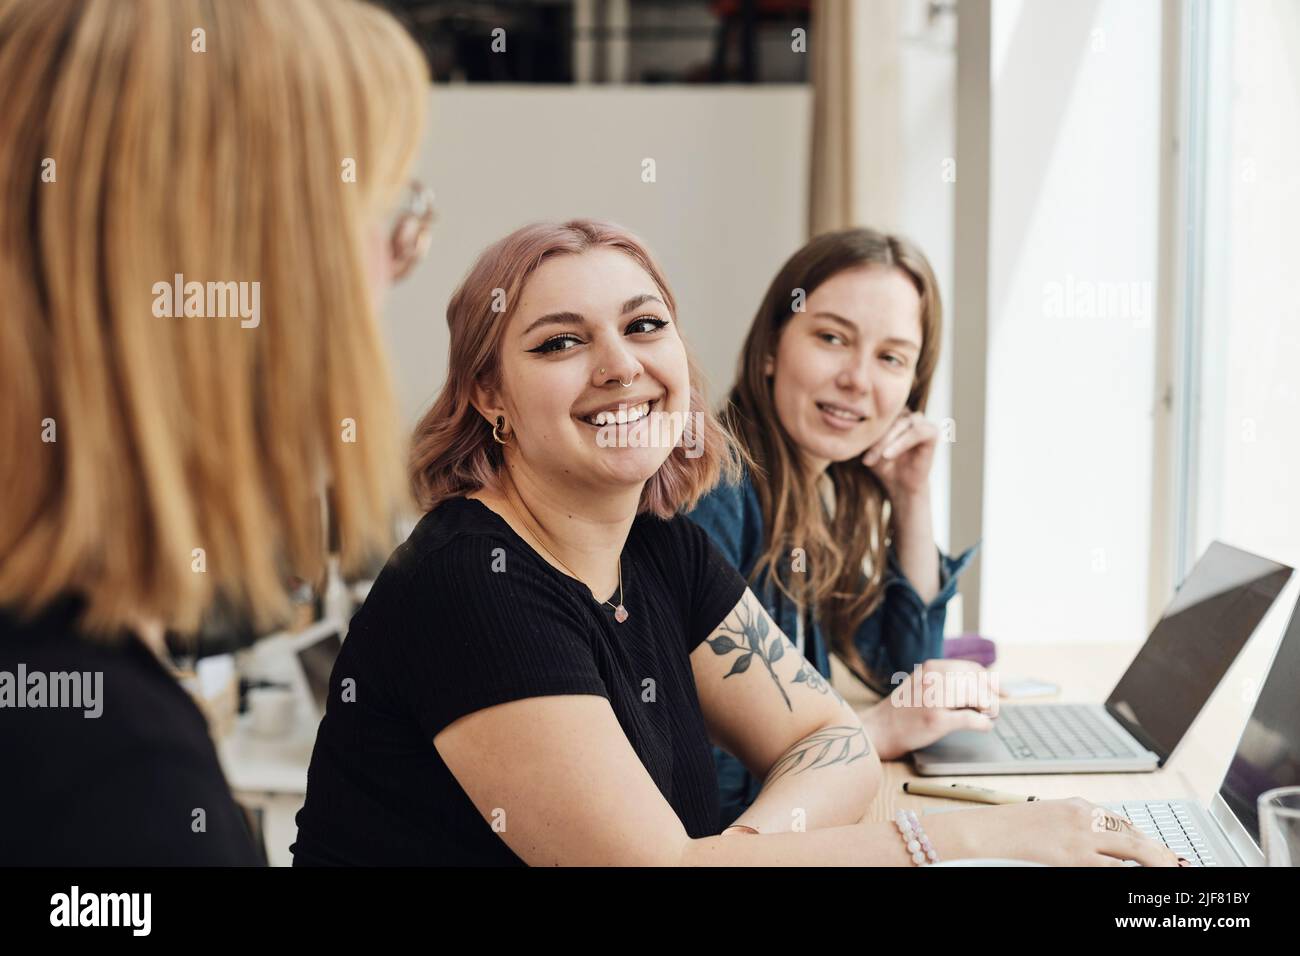 Smiling female entrepreneurs looking at colleague during meeting in office Stock Photo